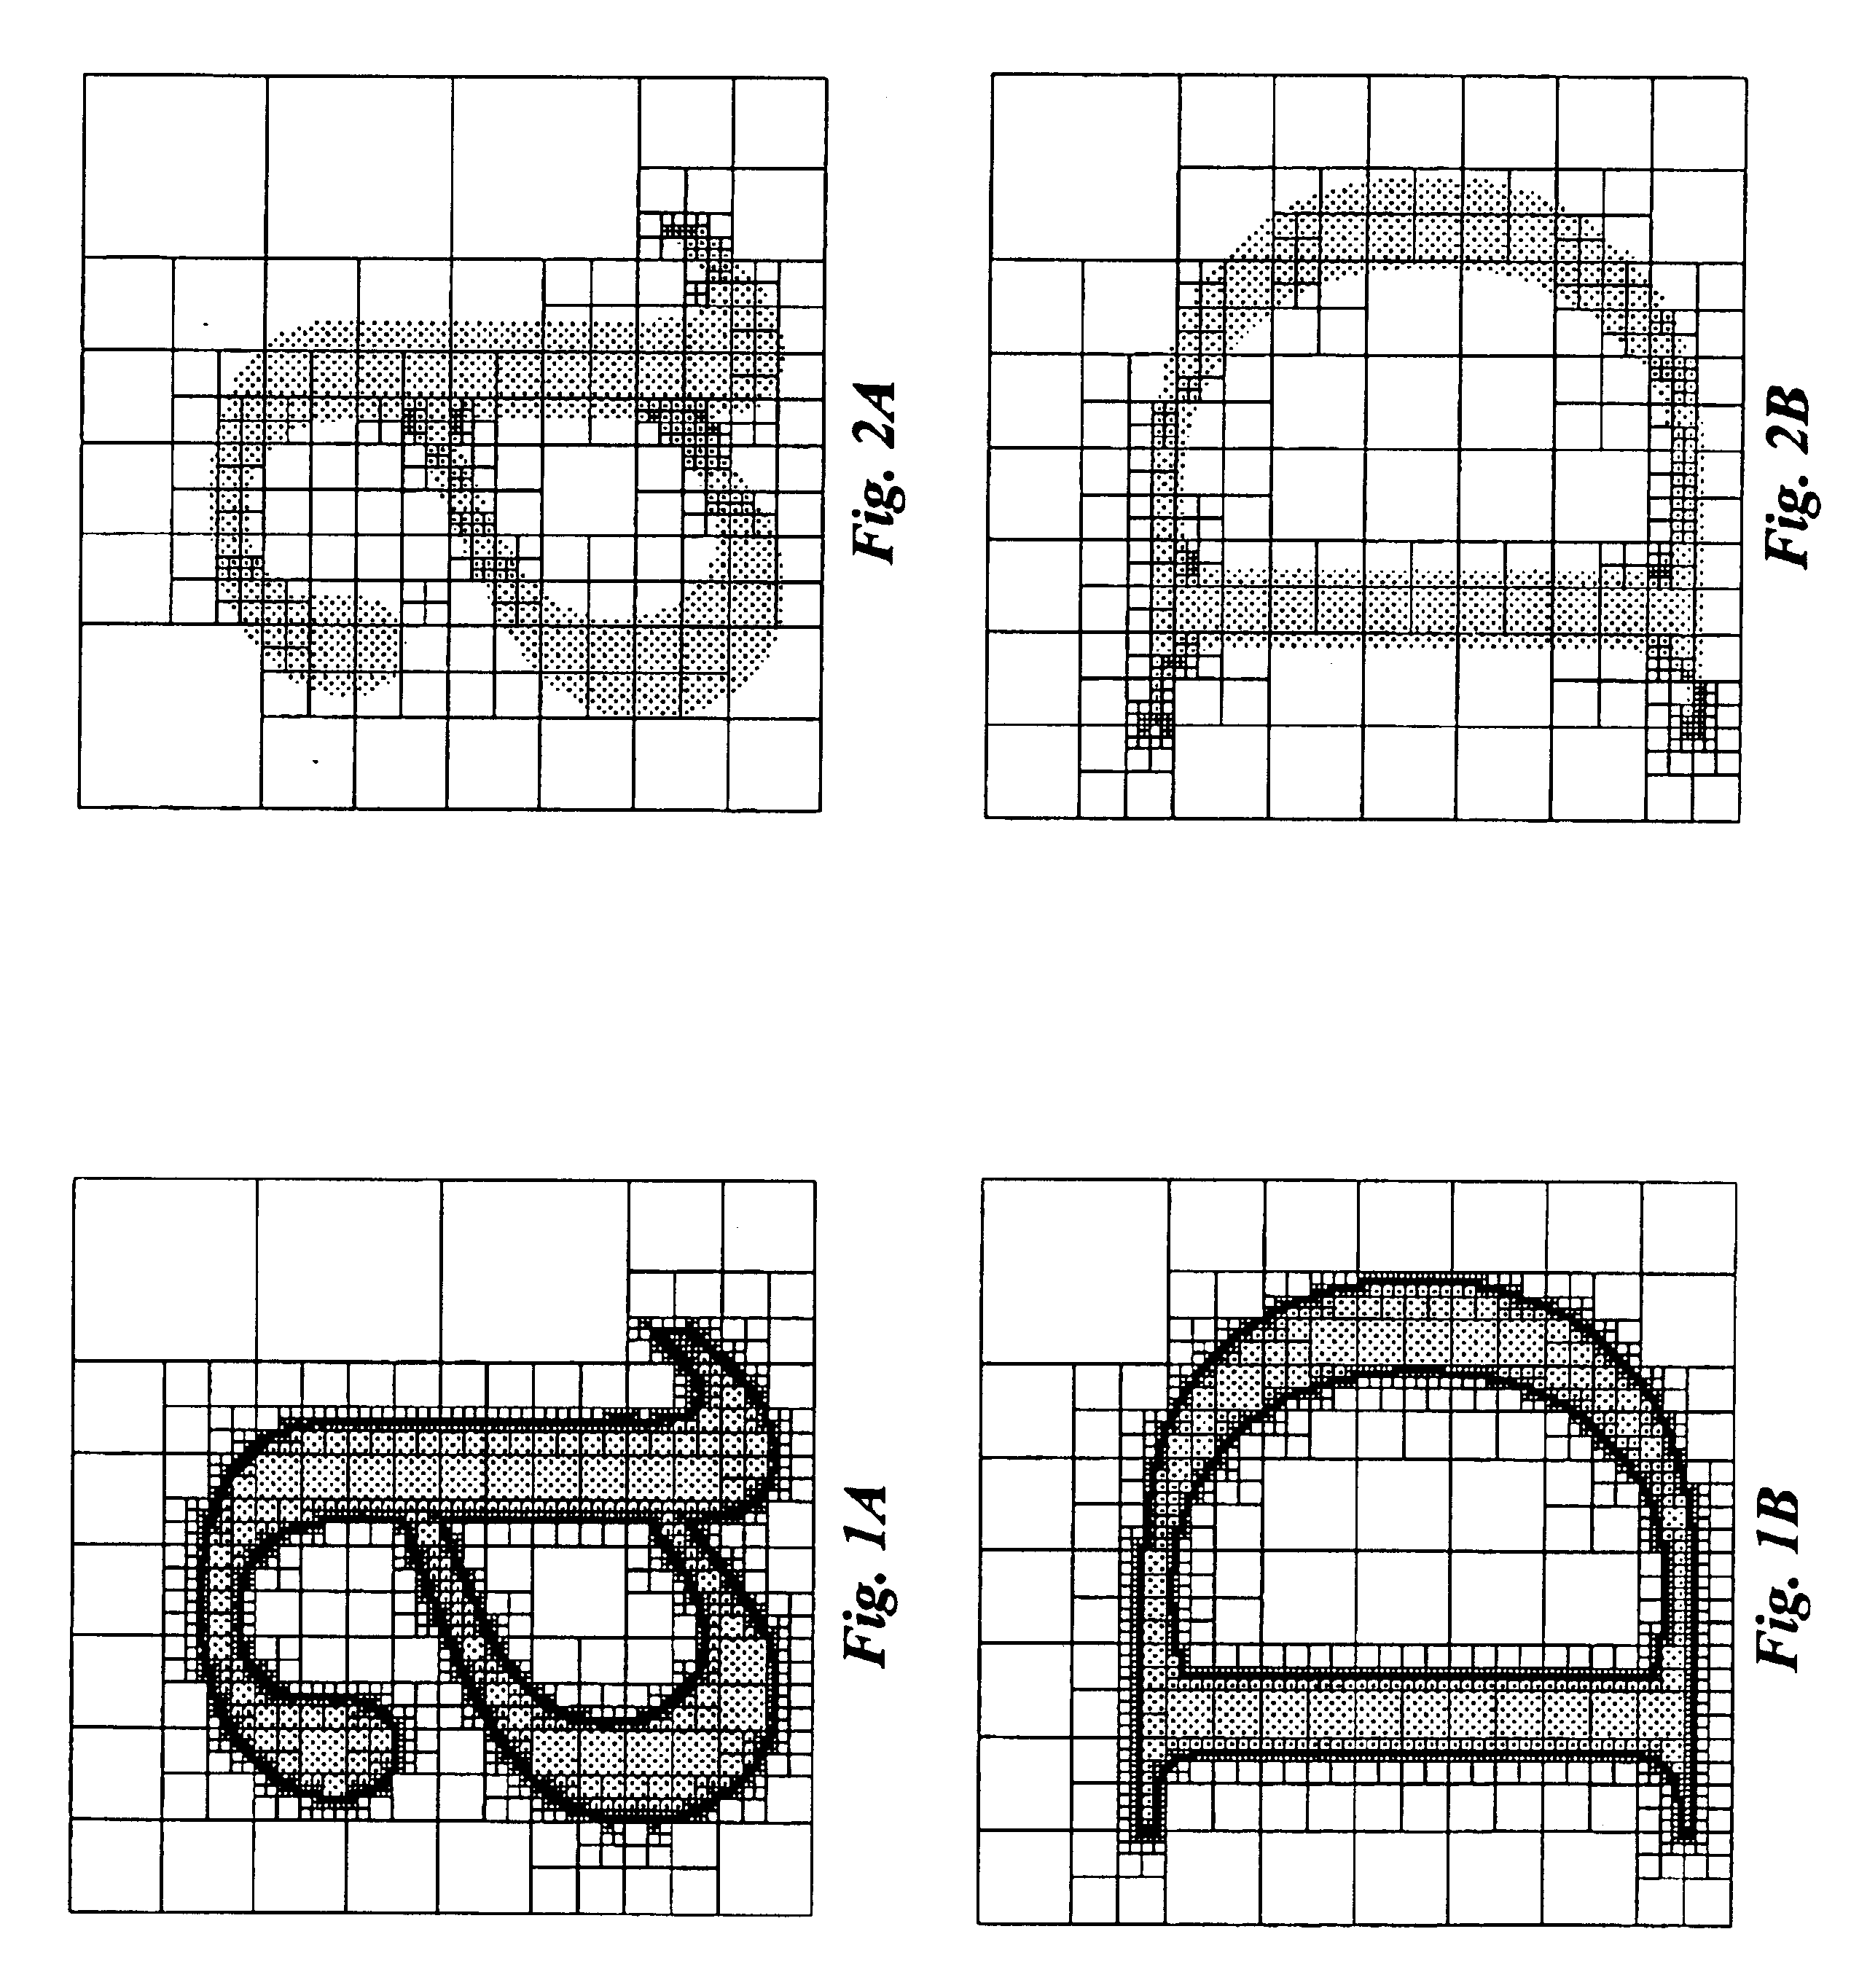 Method and apparatus for rendering cell-based distance fields using texture mapping